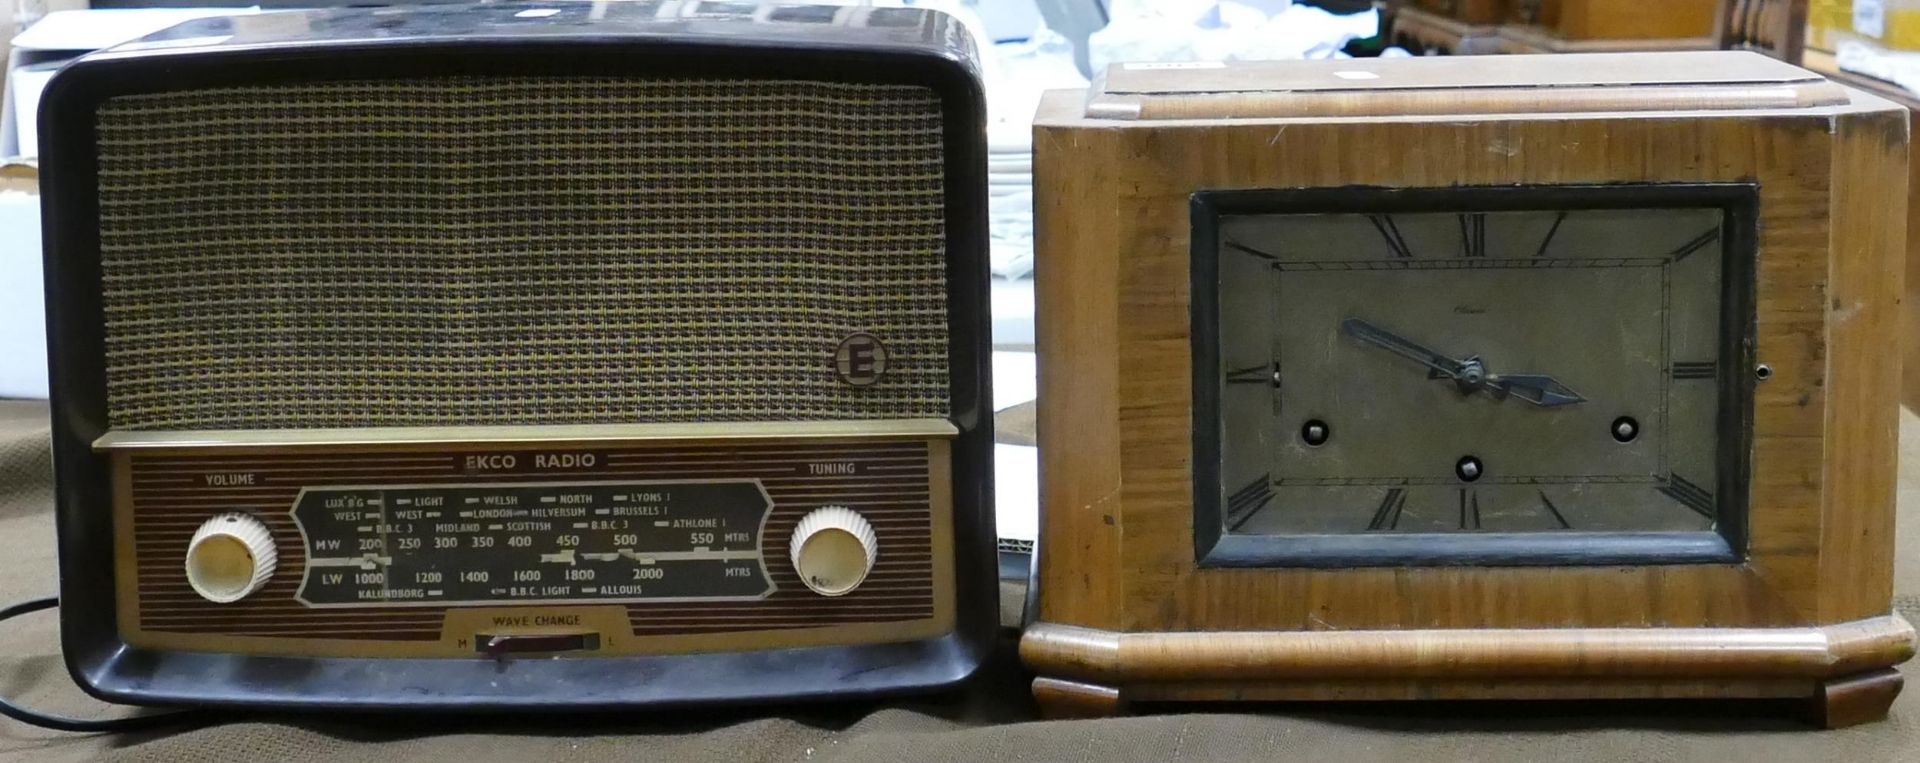 ECKO radio model U245 together with Clarion Clock Company of London art deco open faced Mantle clock